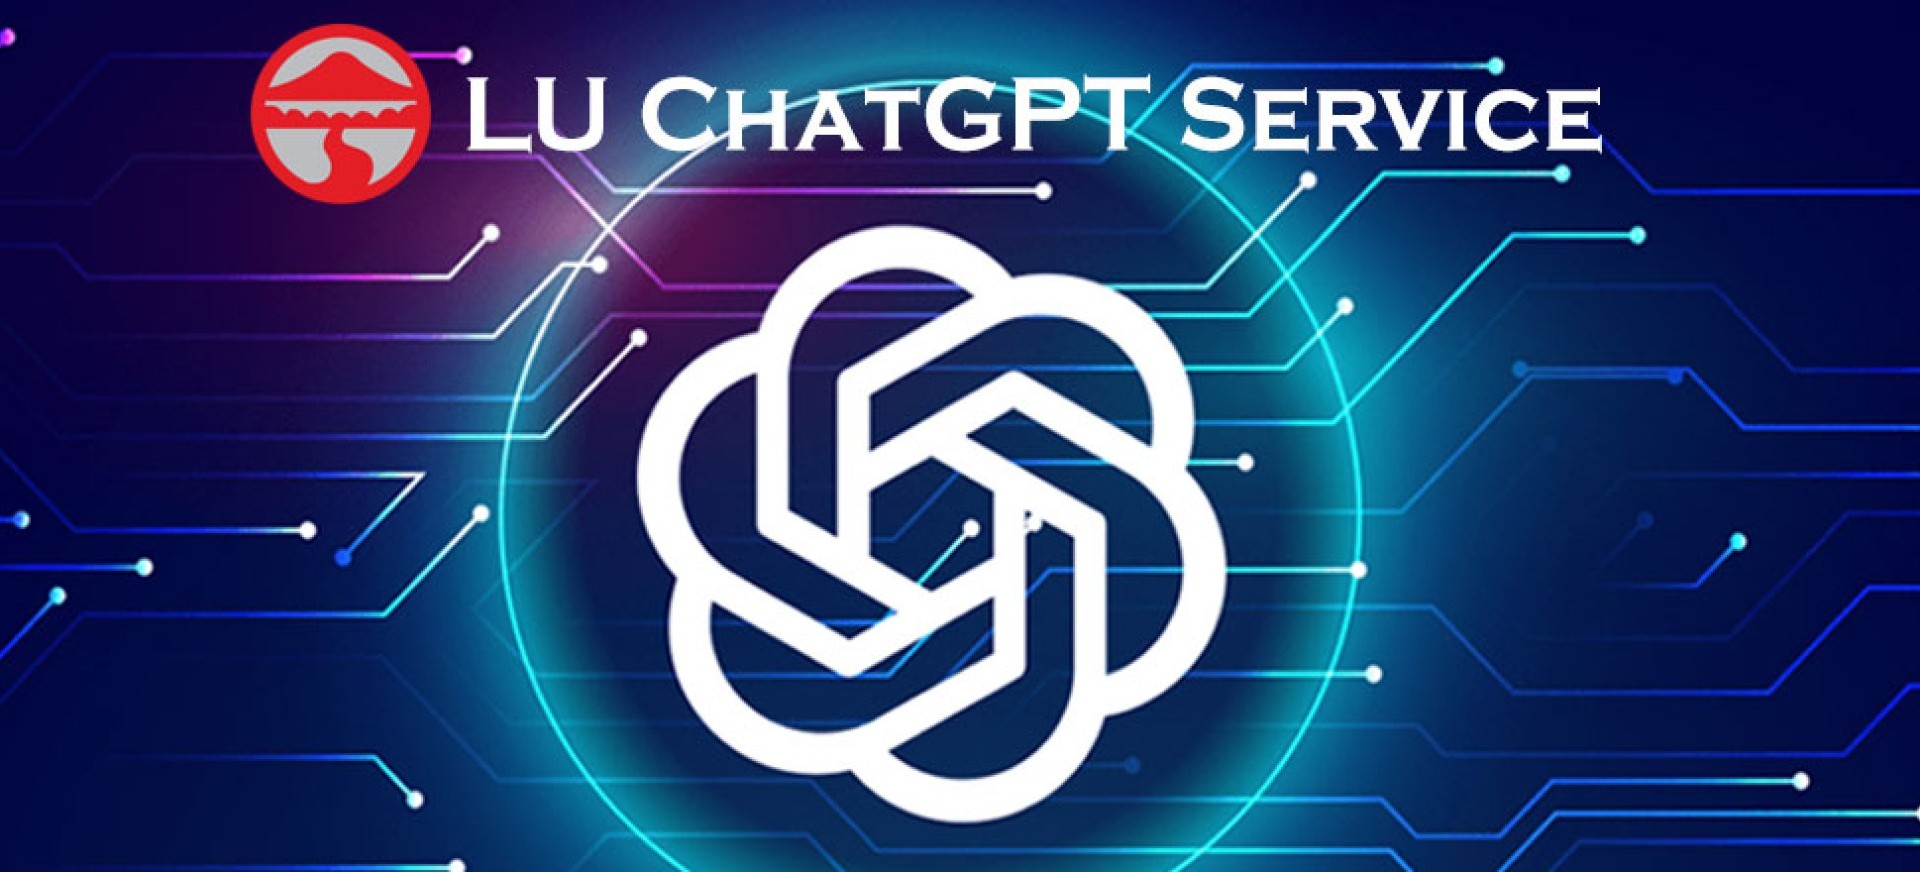 Launch of ChatGPT to University Community